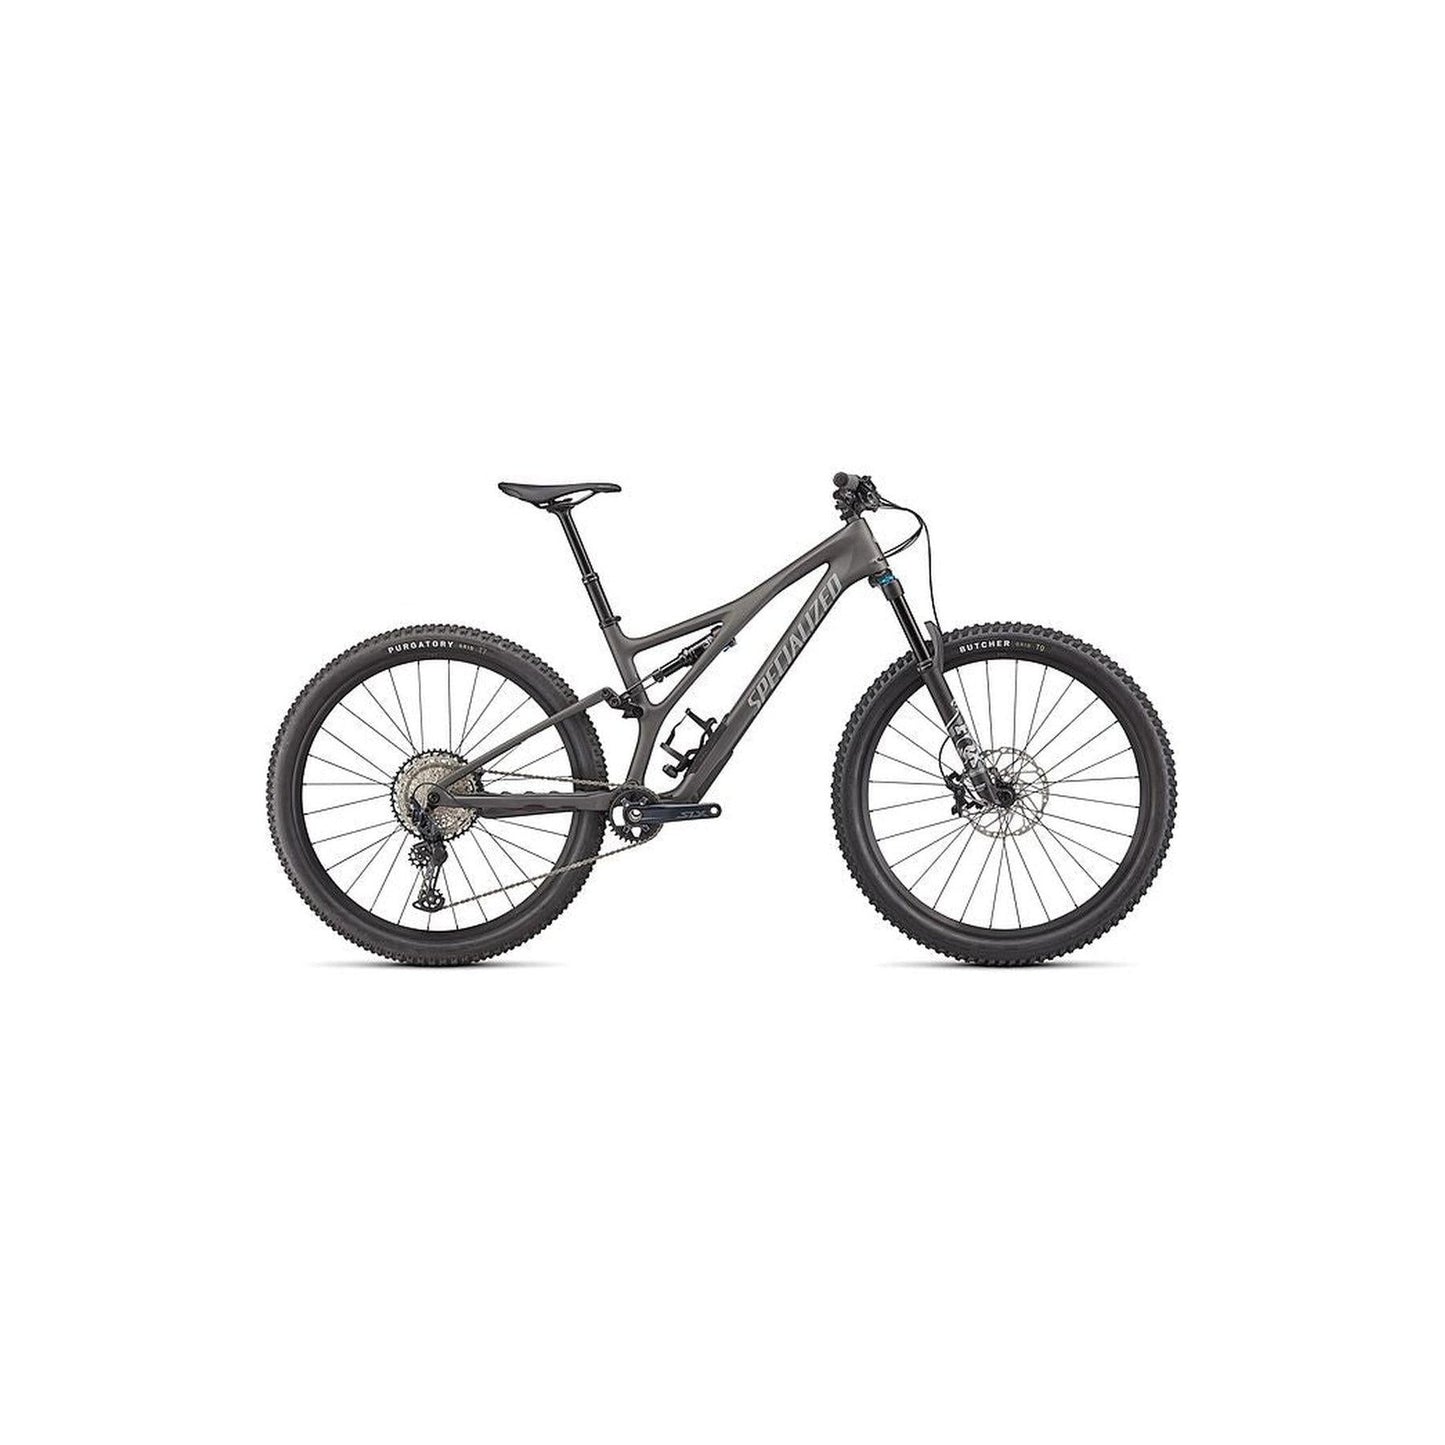 Stumpjumper Comp | completecyclist - Unrivaled suspension kinematics, sublime handling, perfectly-tuned frame stiffnessÑthe Stumpjumper Comp is our fully featured, fully affordable, full-carbon,